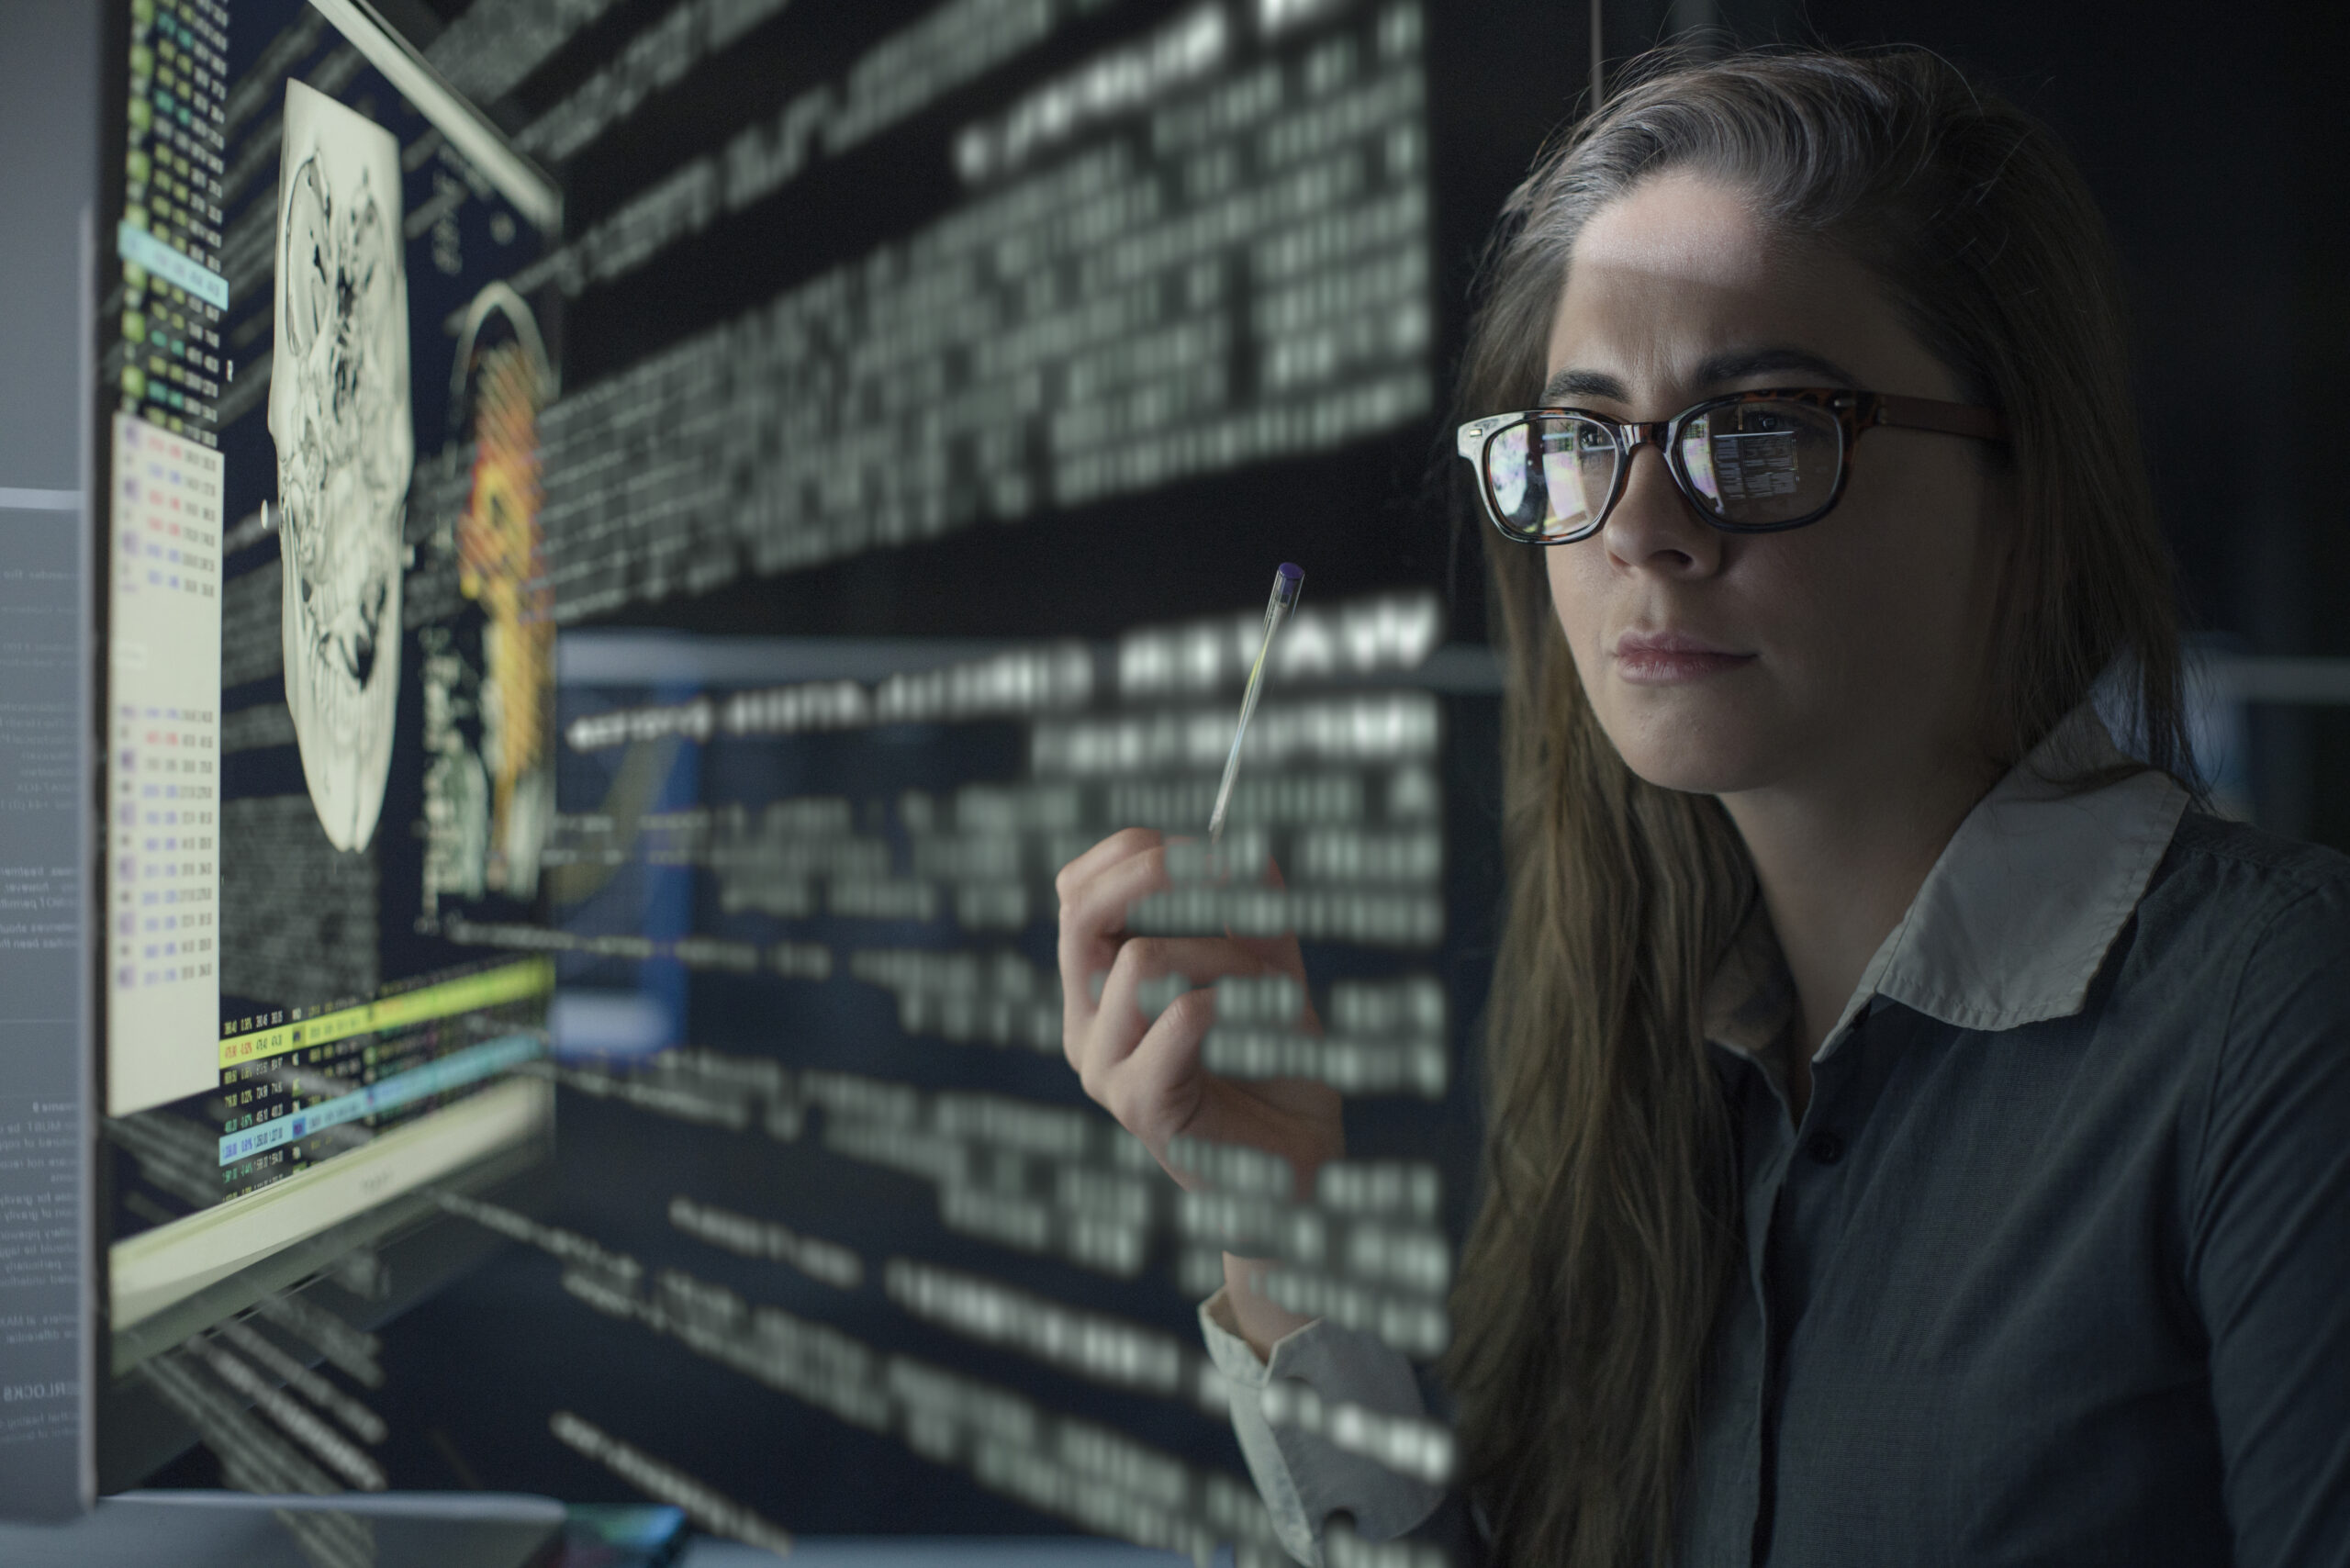 Stock photo of a pretty young woman looking at a computer monitor displaying aspects of human physiology and a see through text display.